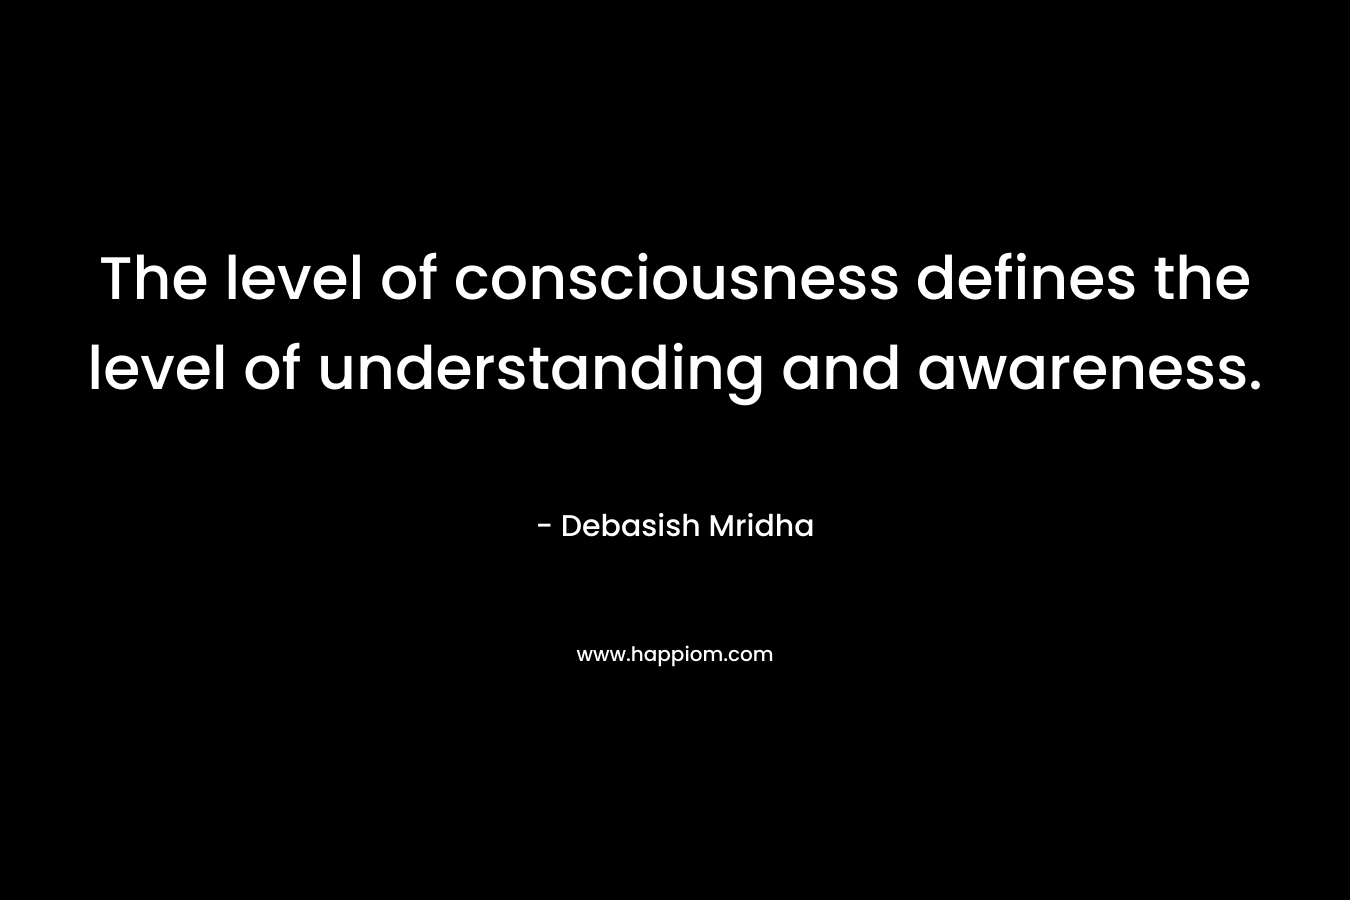 The level of consciousness defines the level of understanding and awareness.